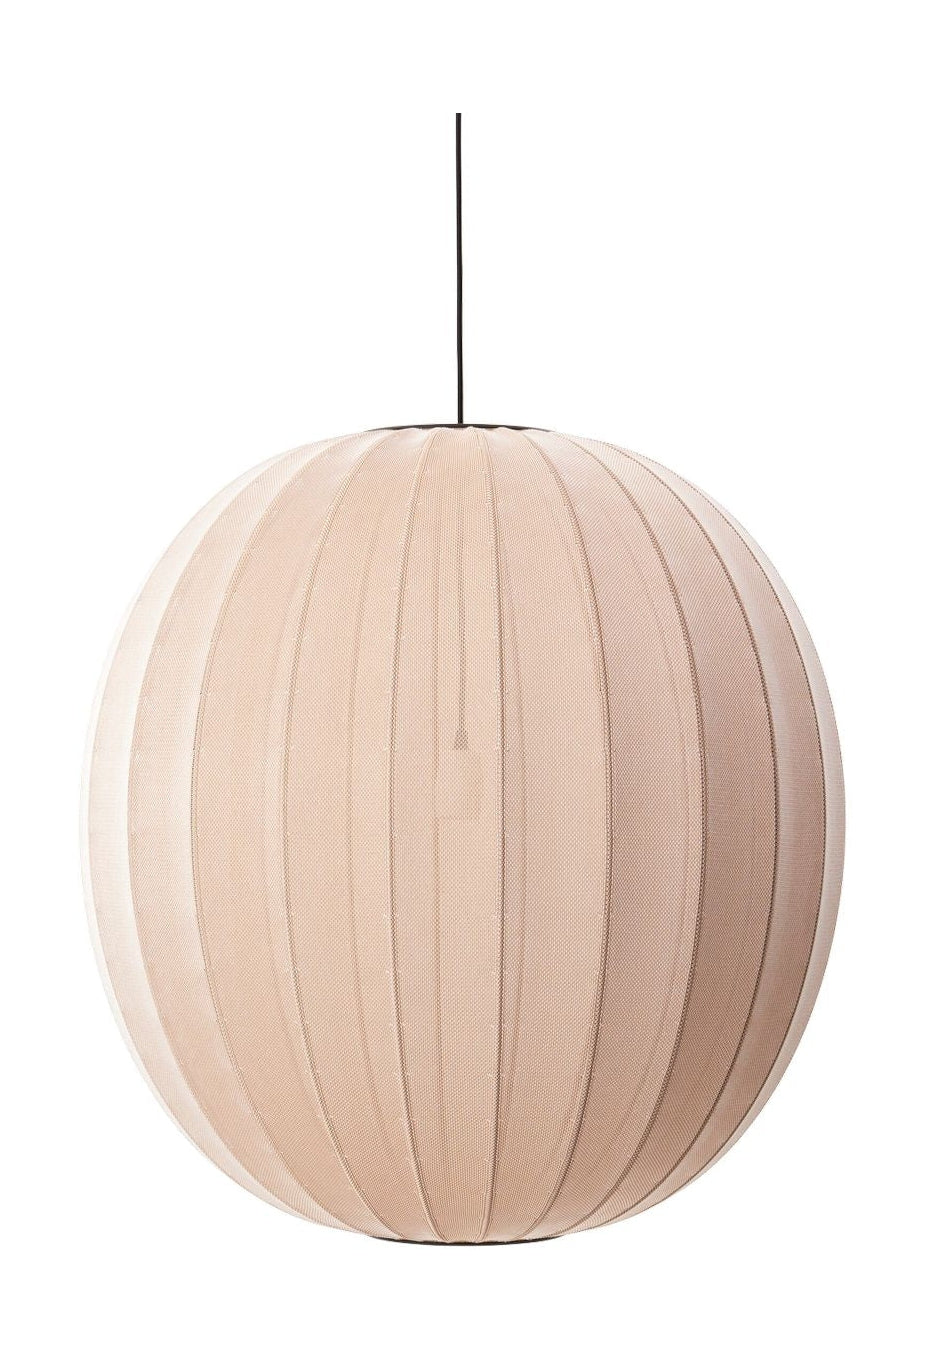 Made By Hand Knit Wit 75 Round Pendant Lamp, Sand Stone